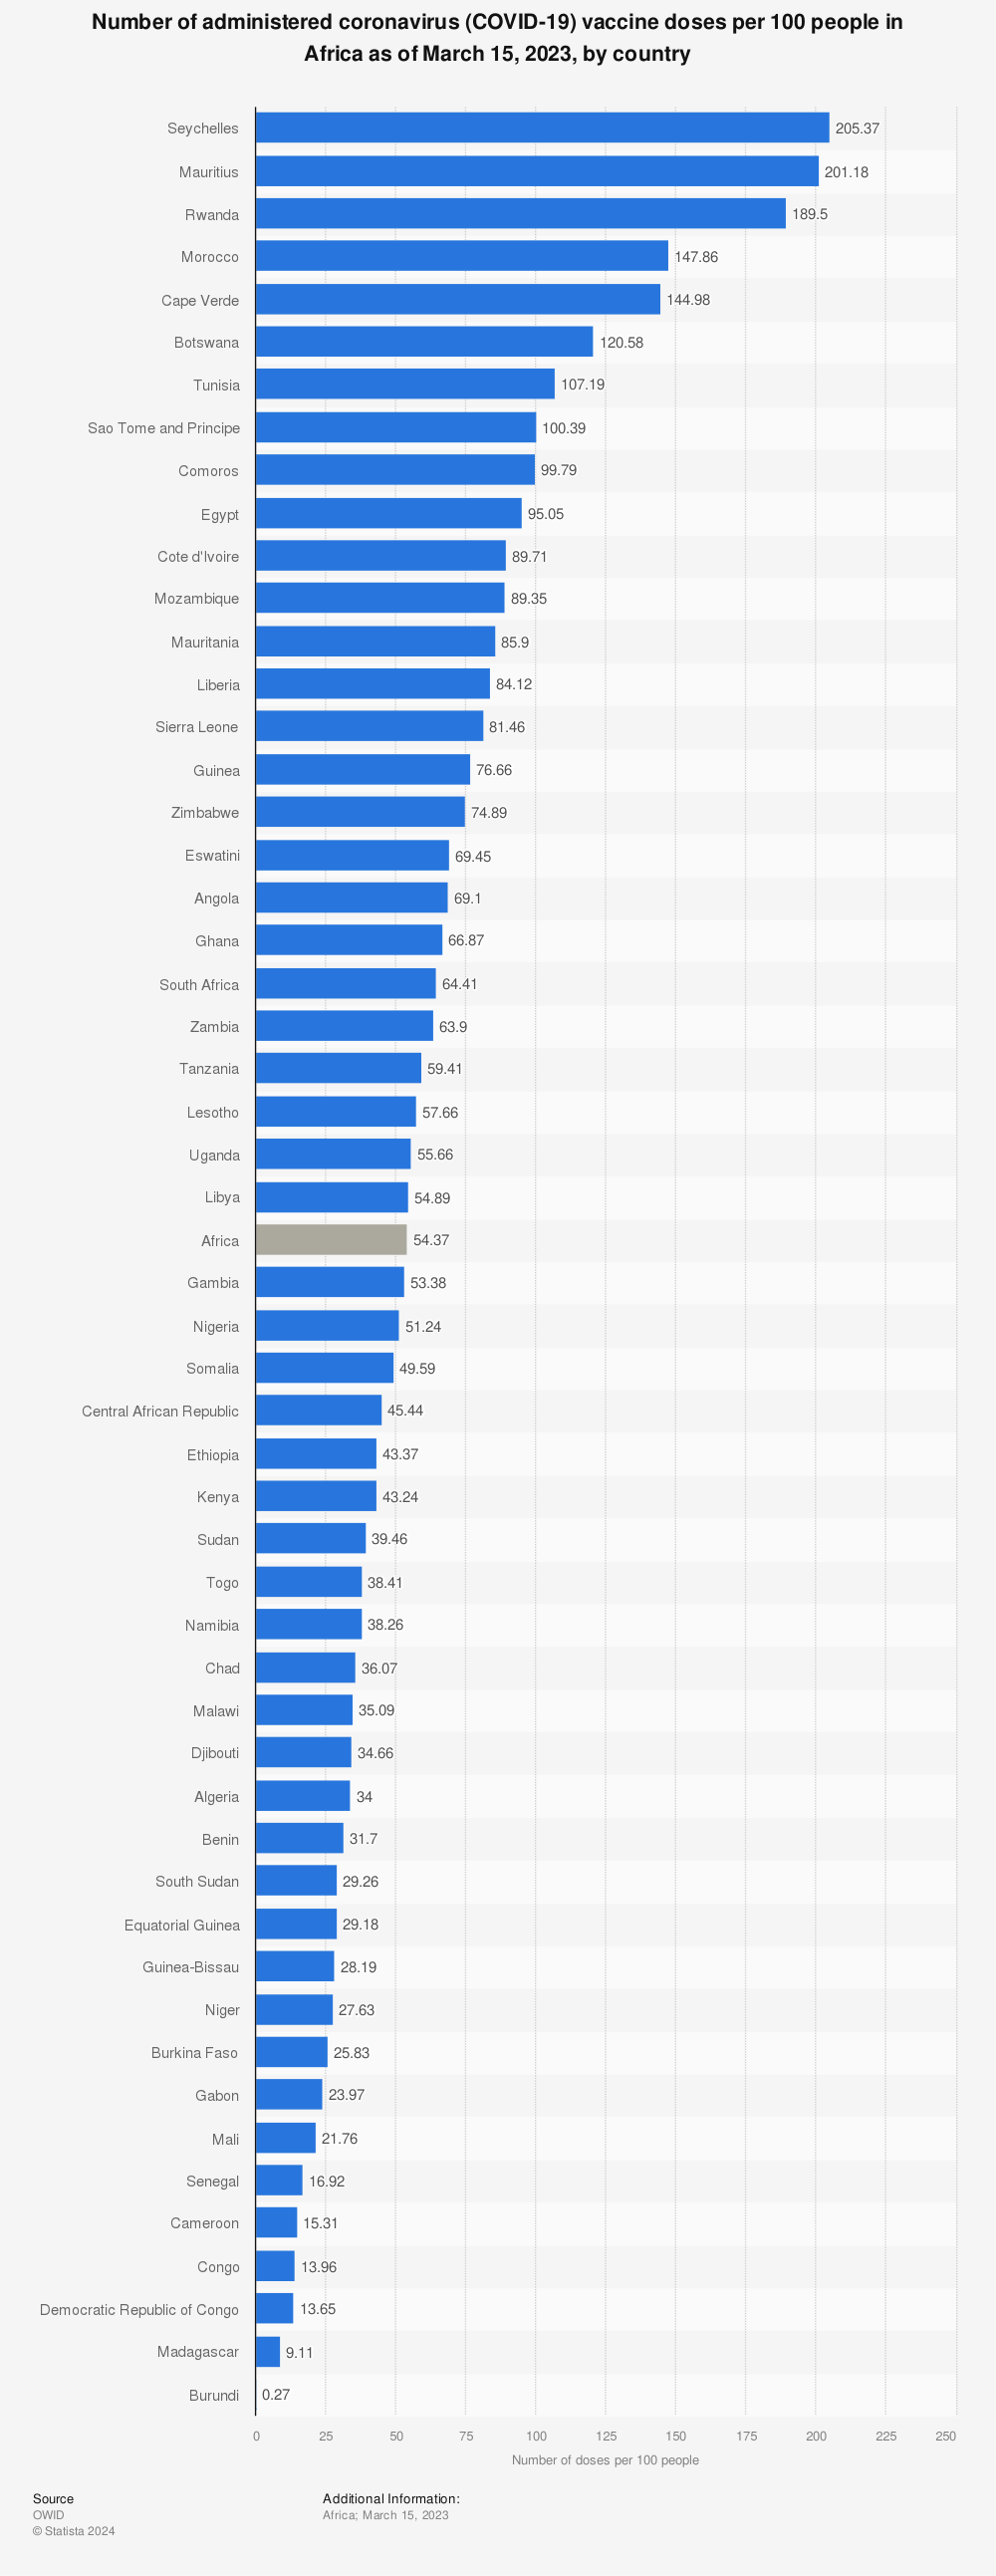 Statistic: Number of administered coronavirus (COVID-19) vaccine doses per 100 people in Africa as of March 15, 2023, by country | Statista